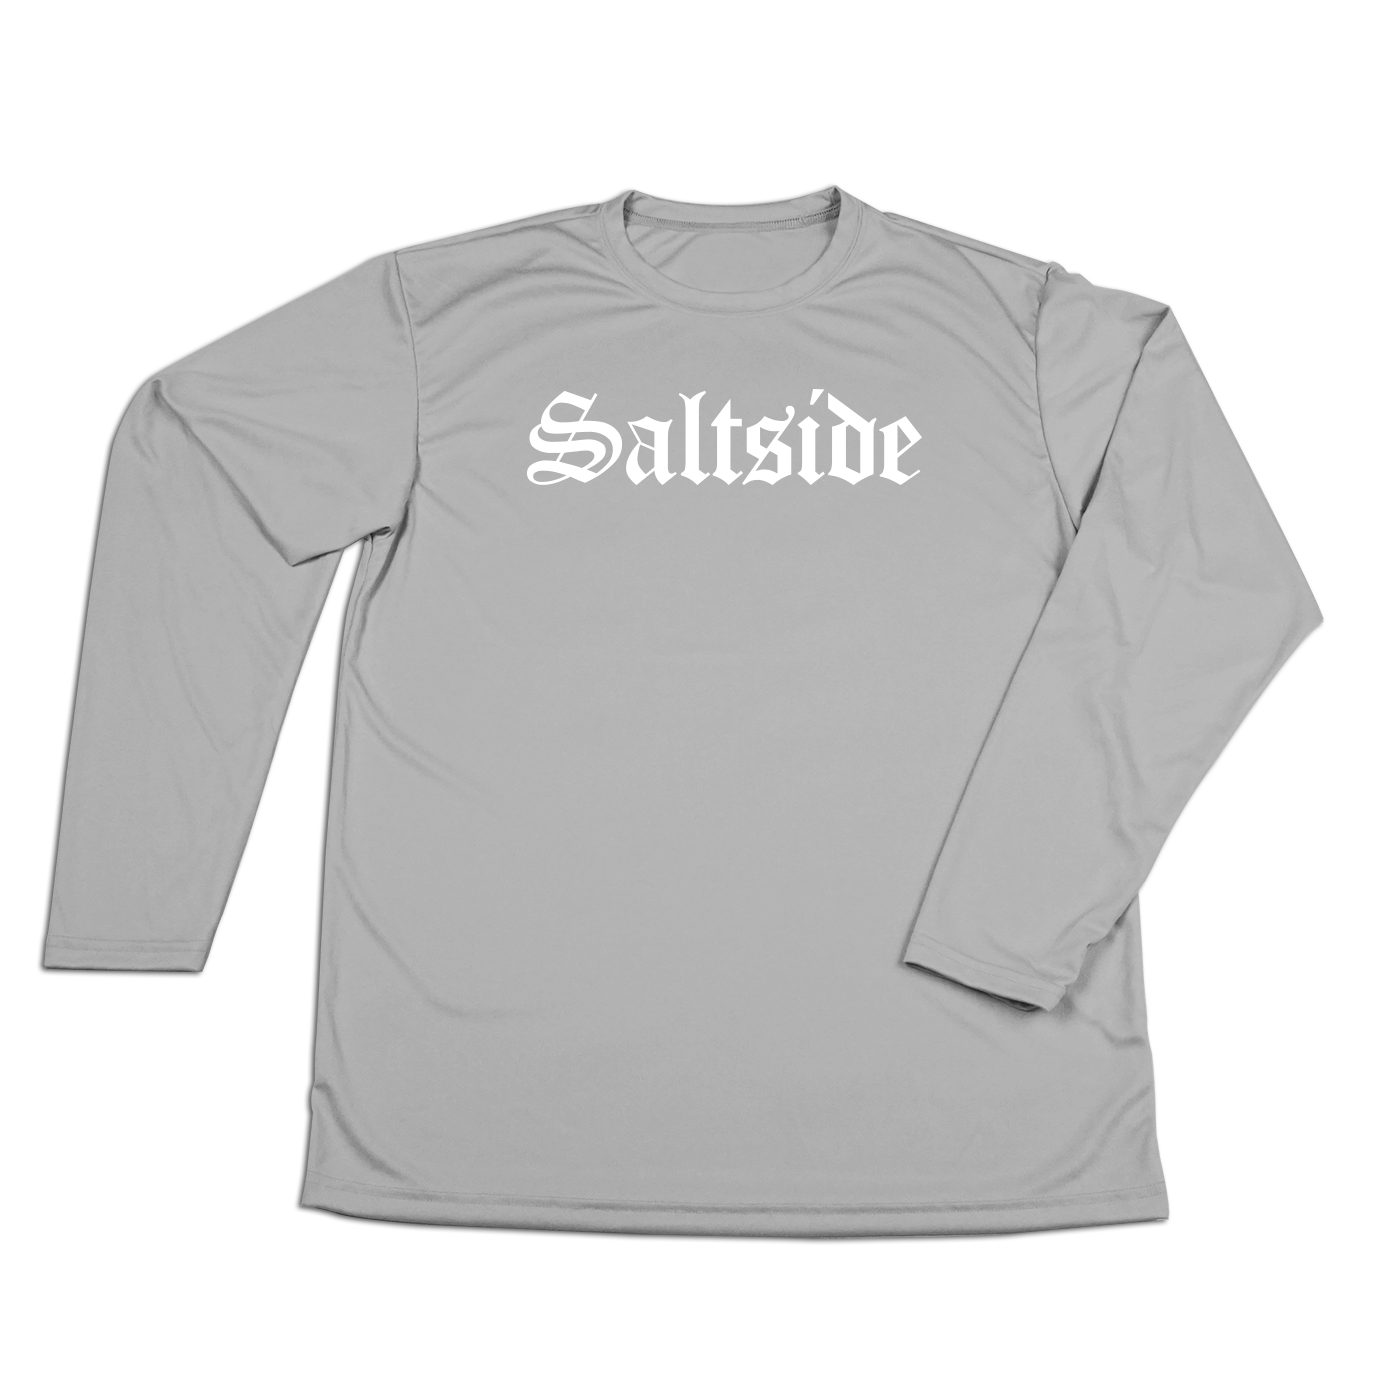 #SALTSIDE YOUTH Performance Long Sleeve Shirt - Hat Mount for GoPro